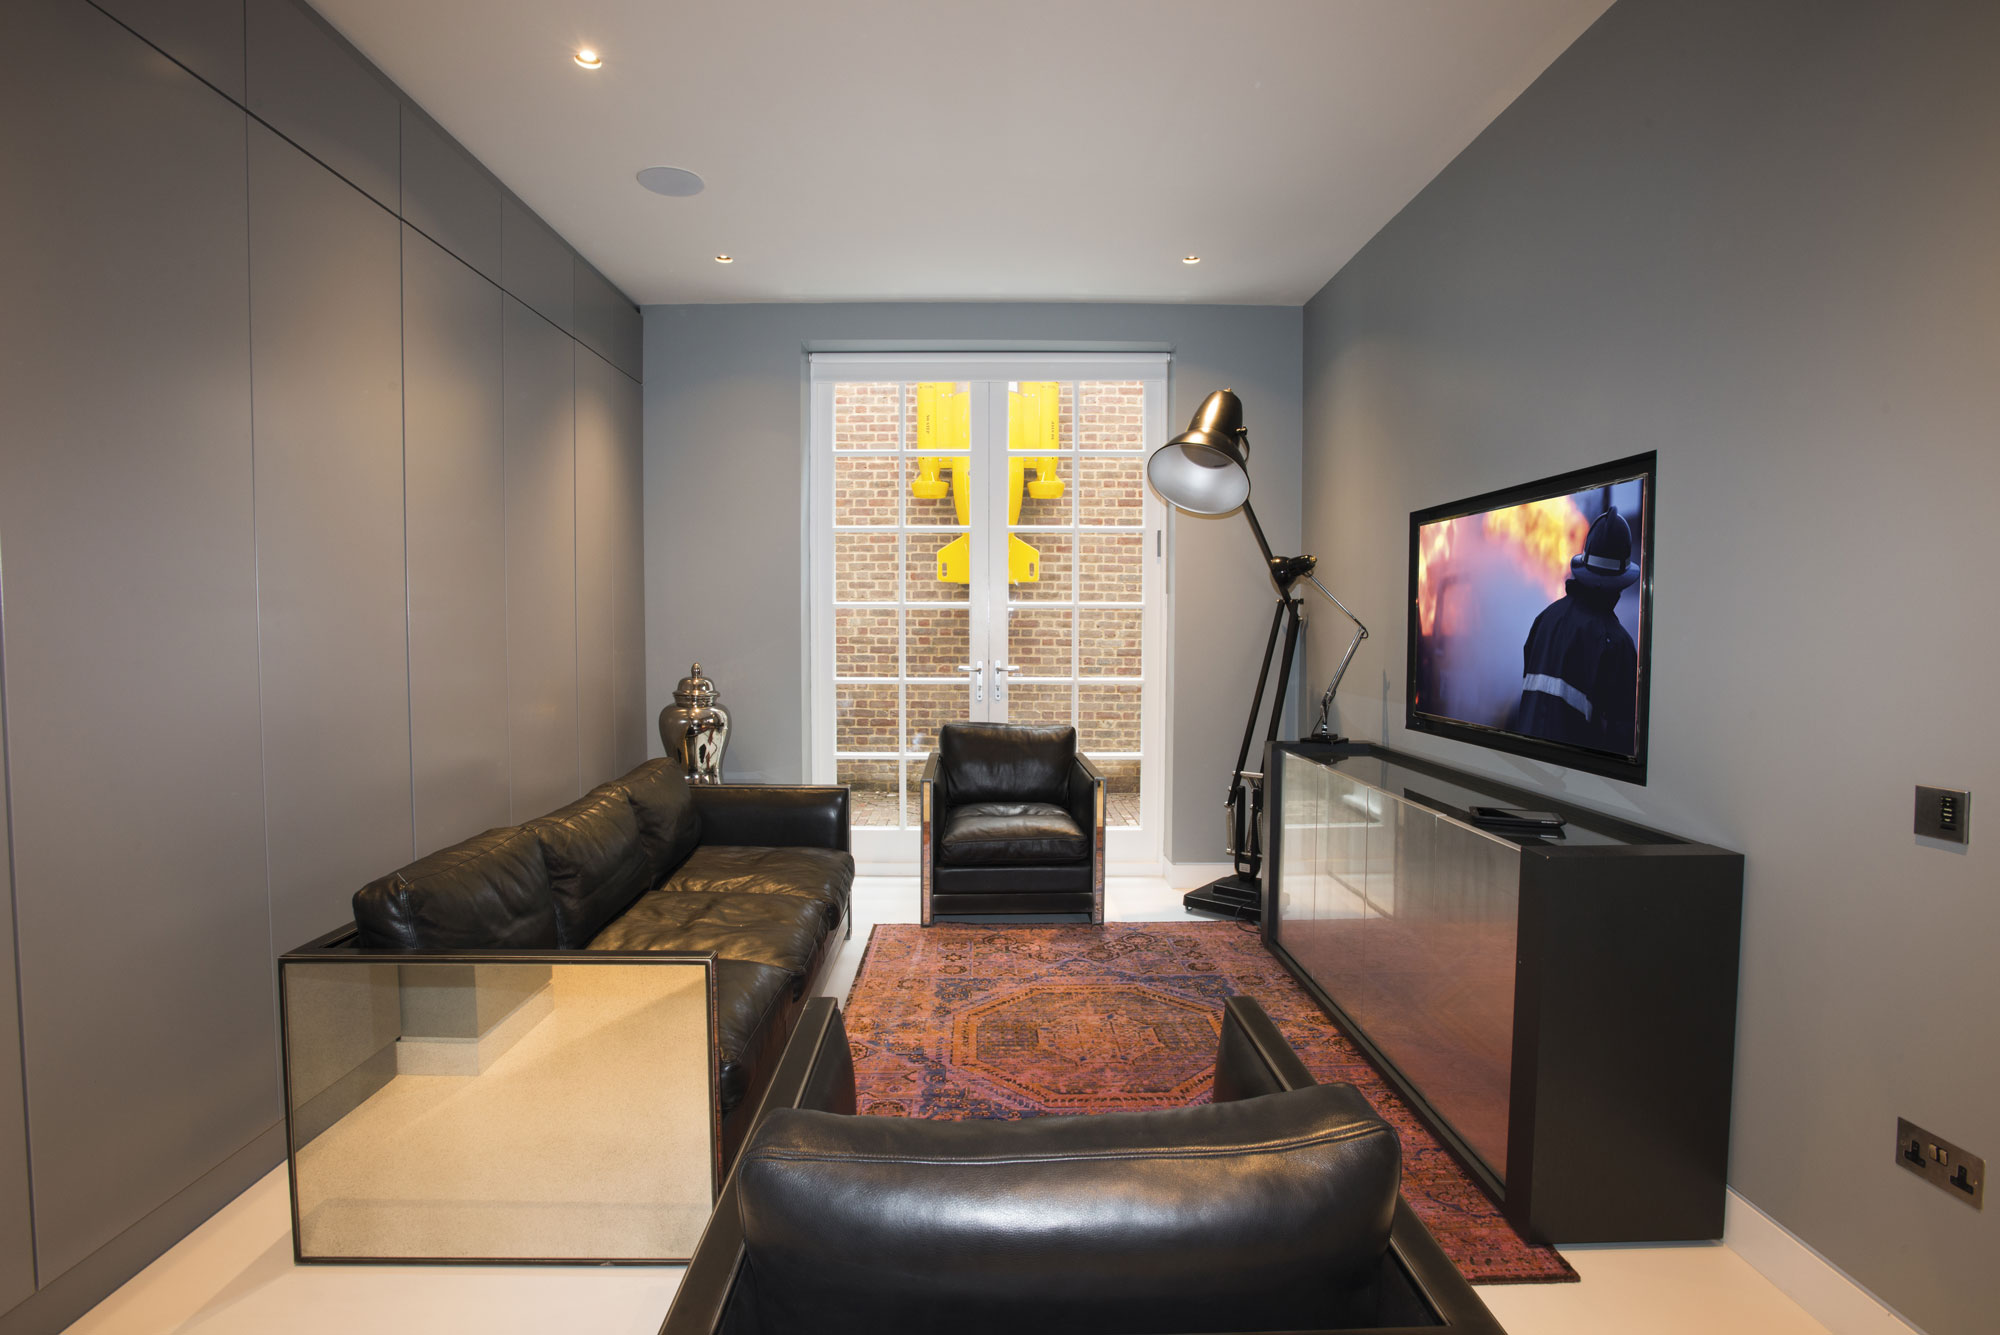  Luxury Family Home - Hampstead gallery image 2